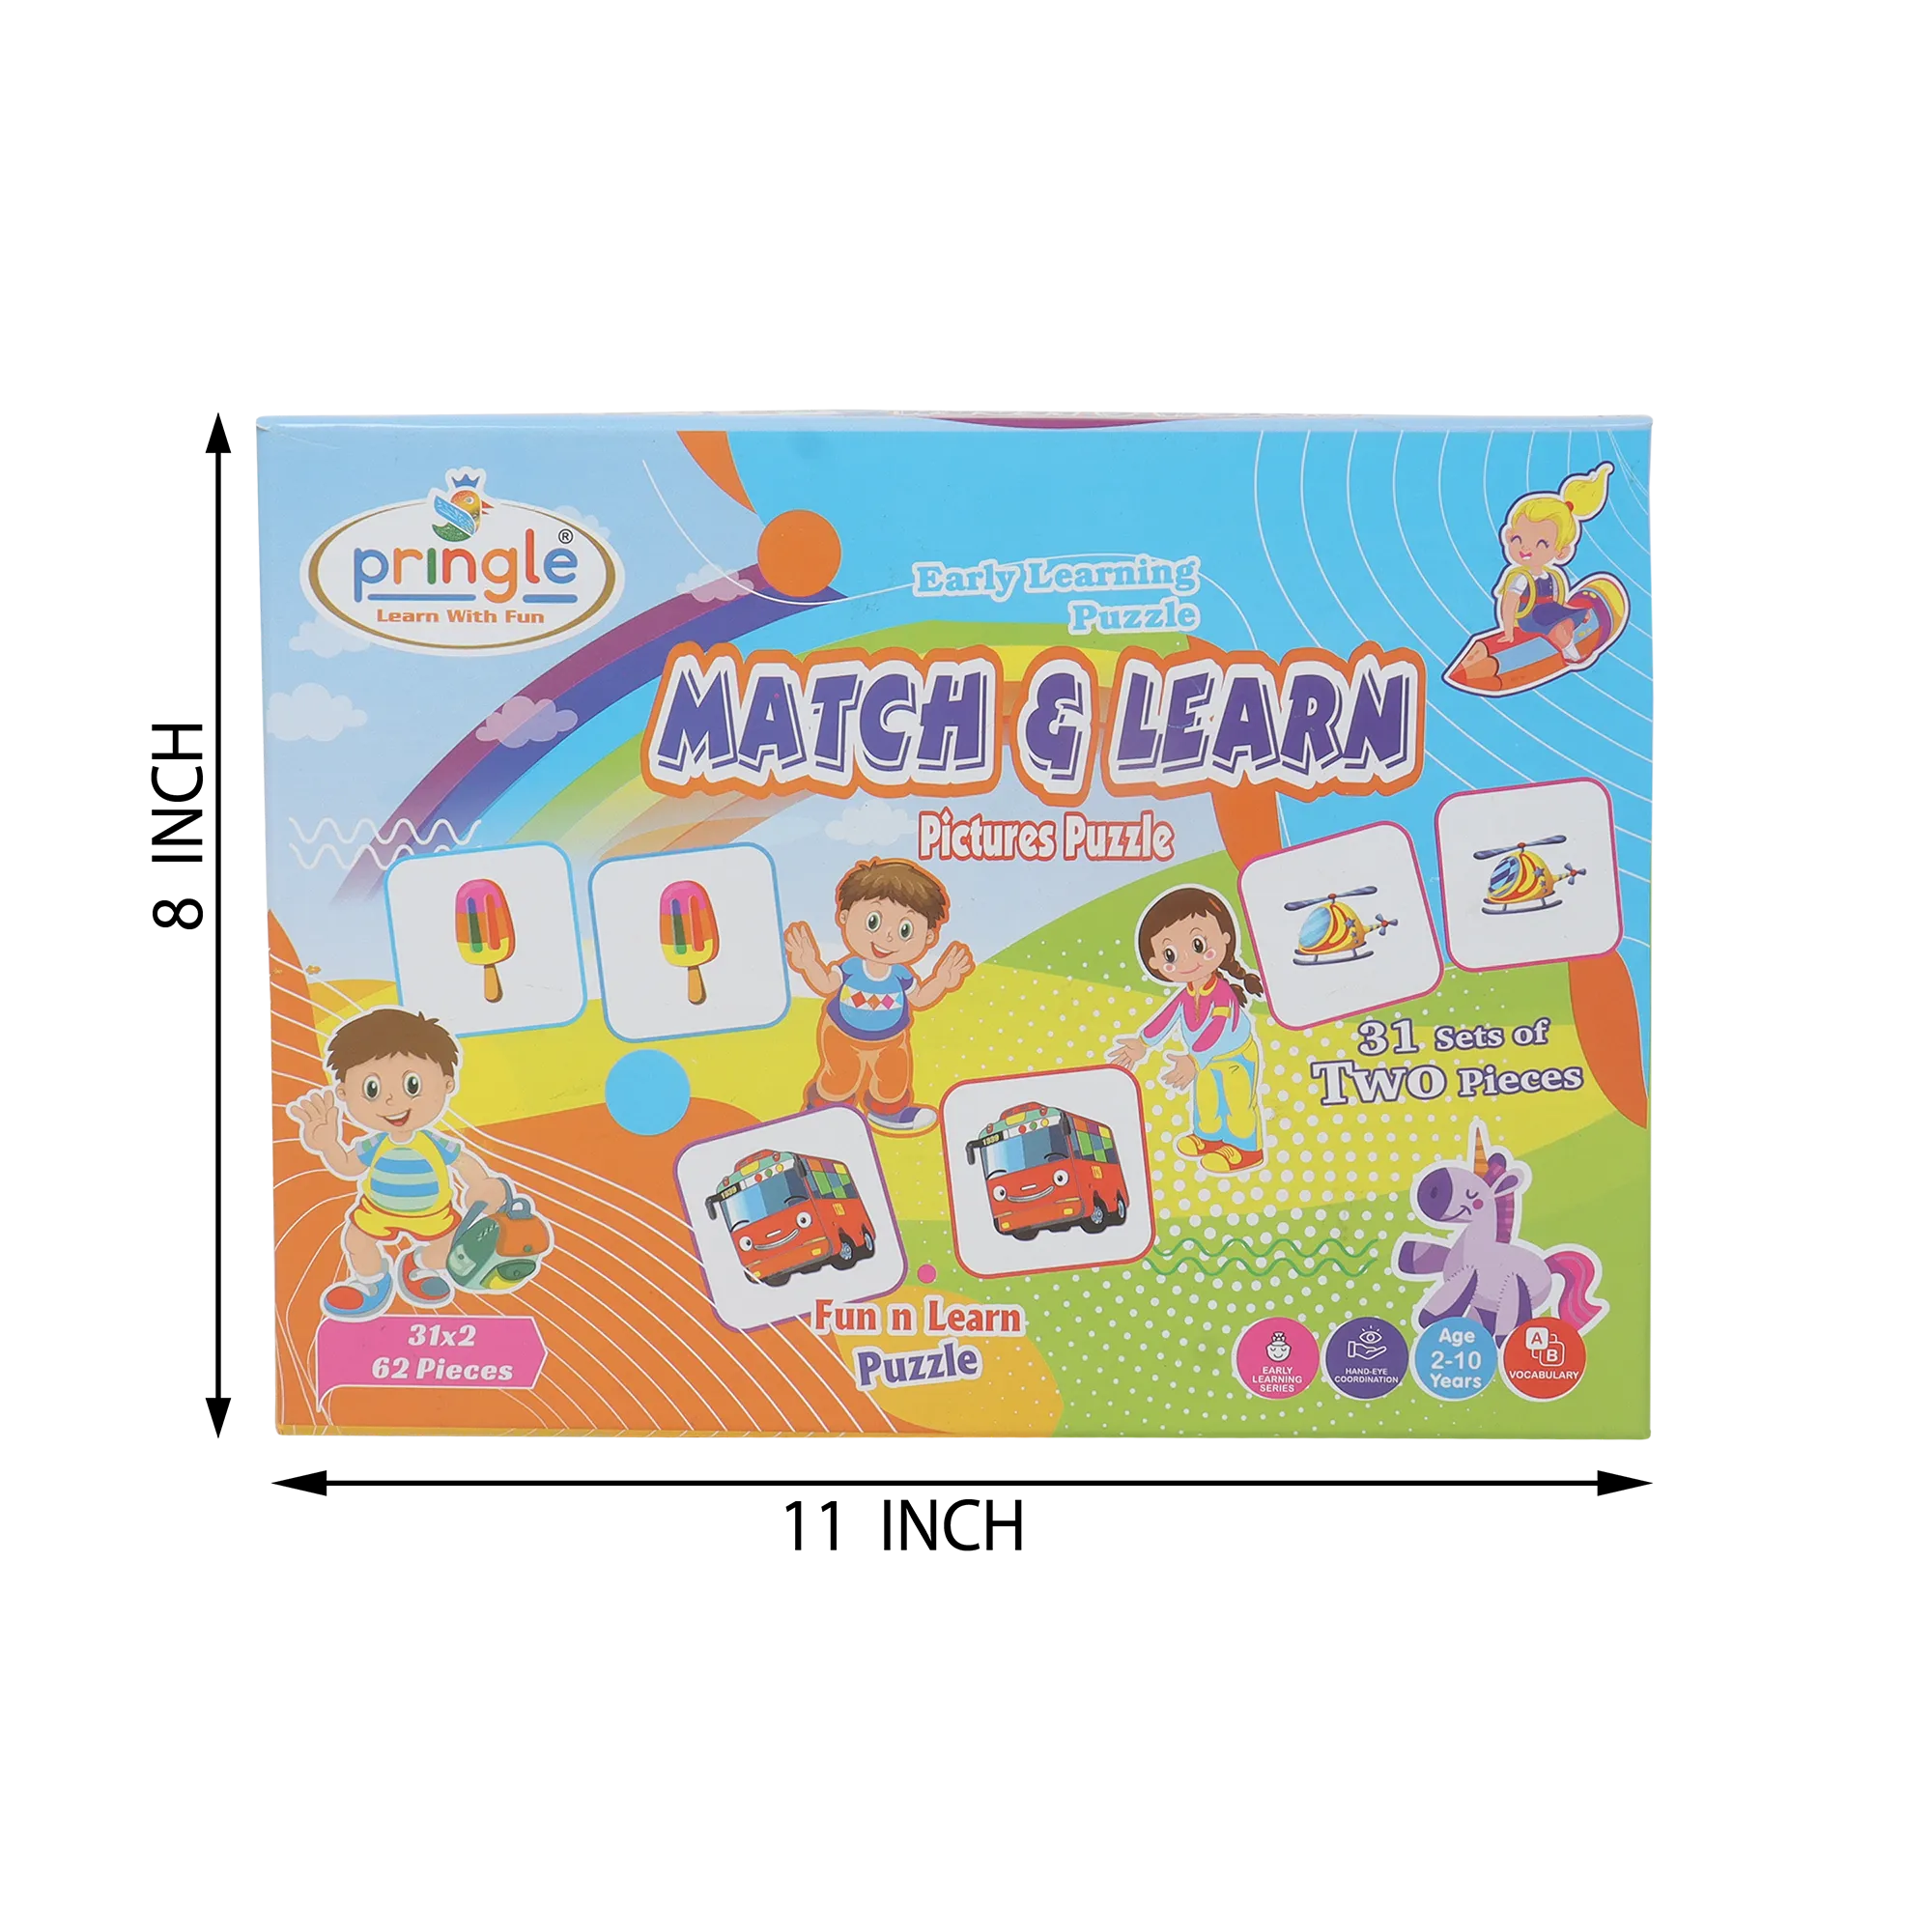 PR27 Match & Learn Pictures Puzzle